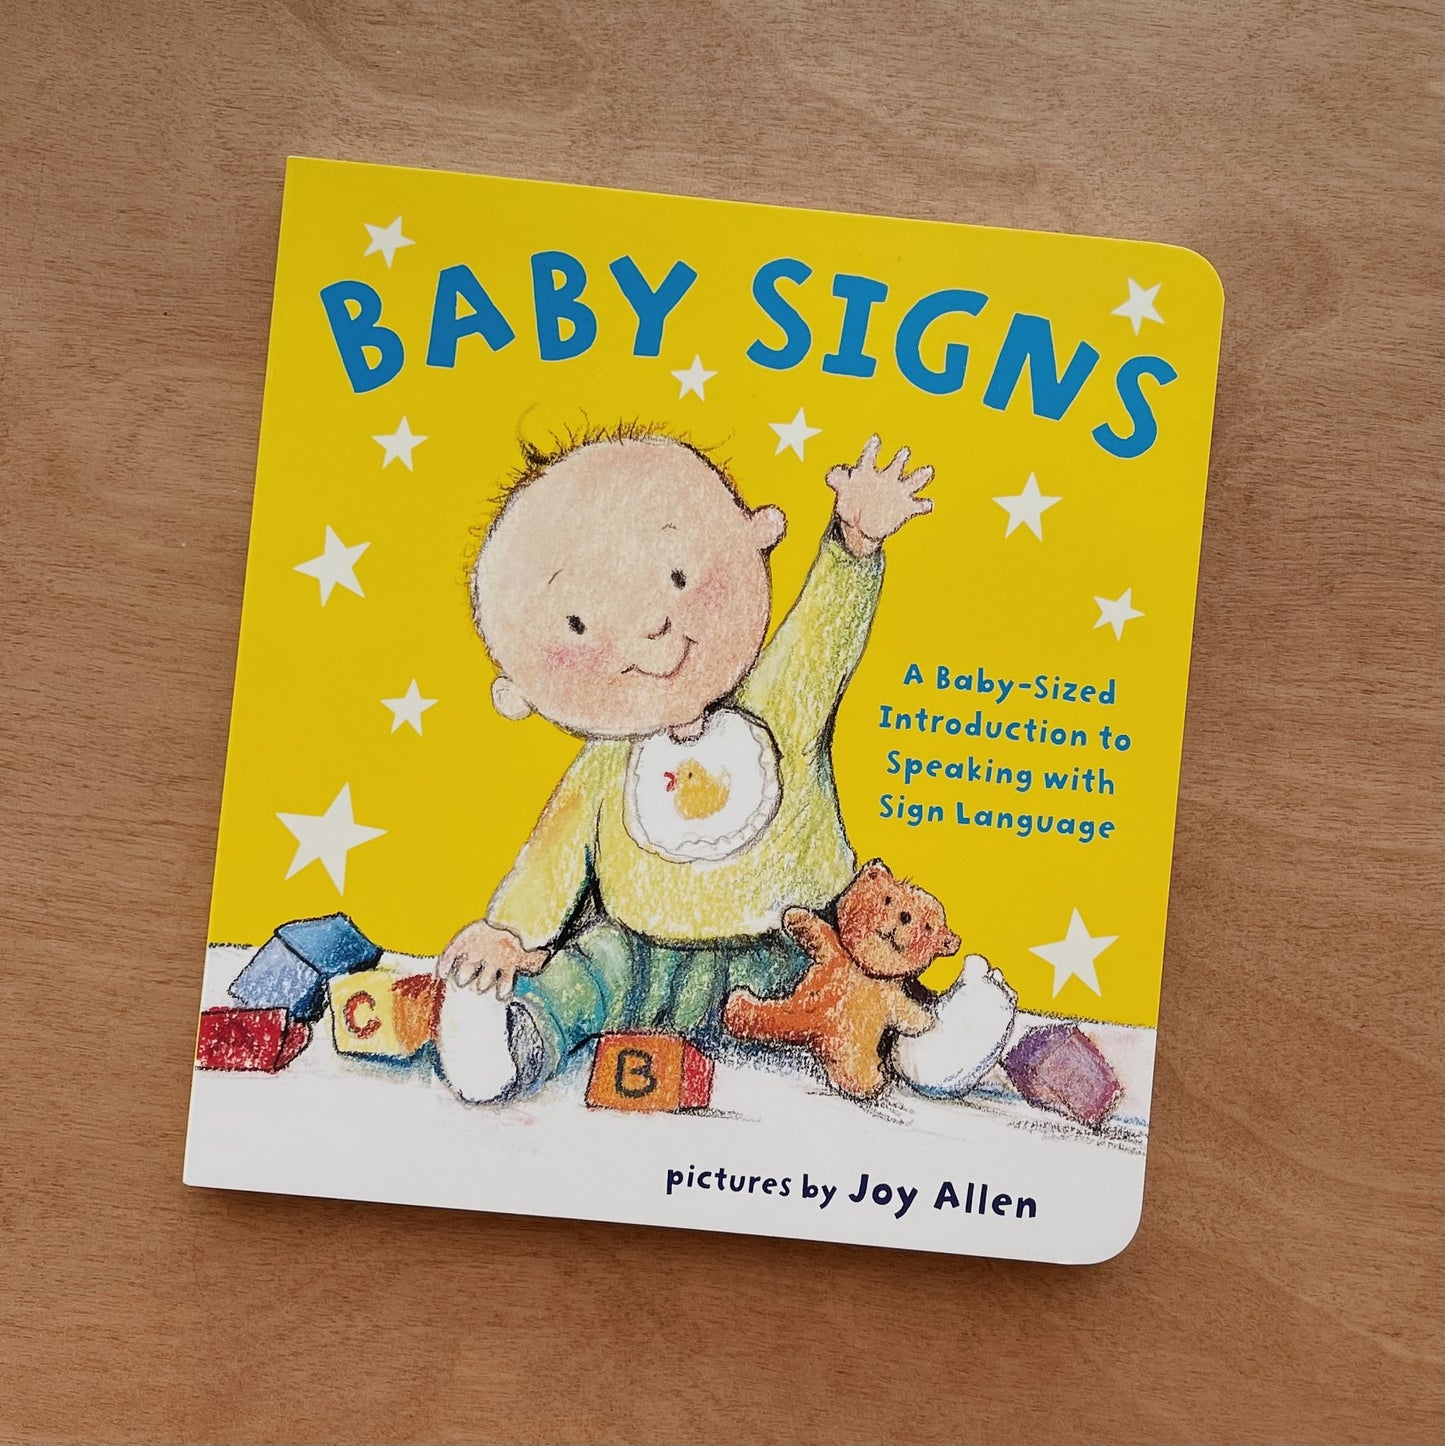 Baby Signs: A BABY-SIZED INTRODUCTION TO SPEAKING WITH SIGN LANGUAGE